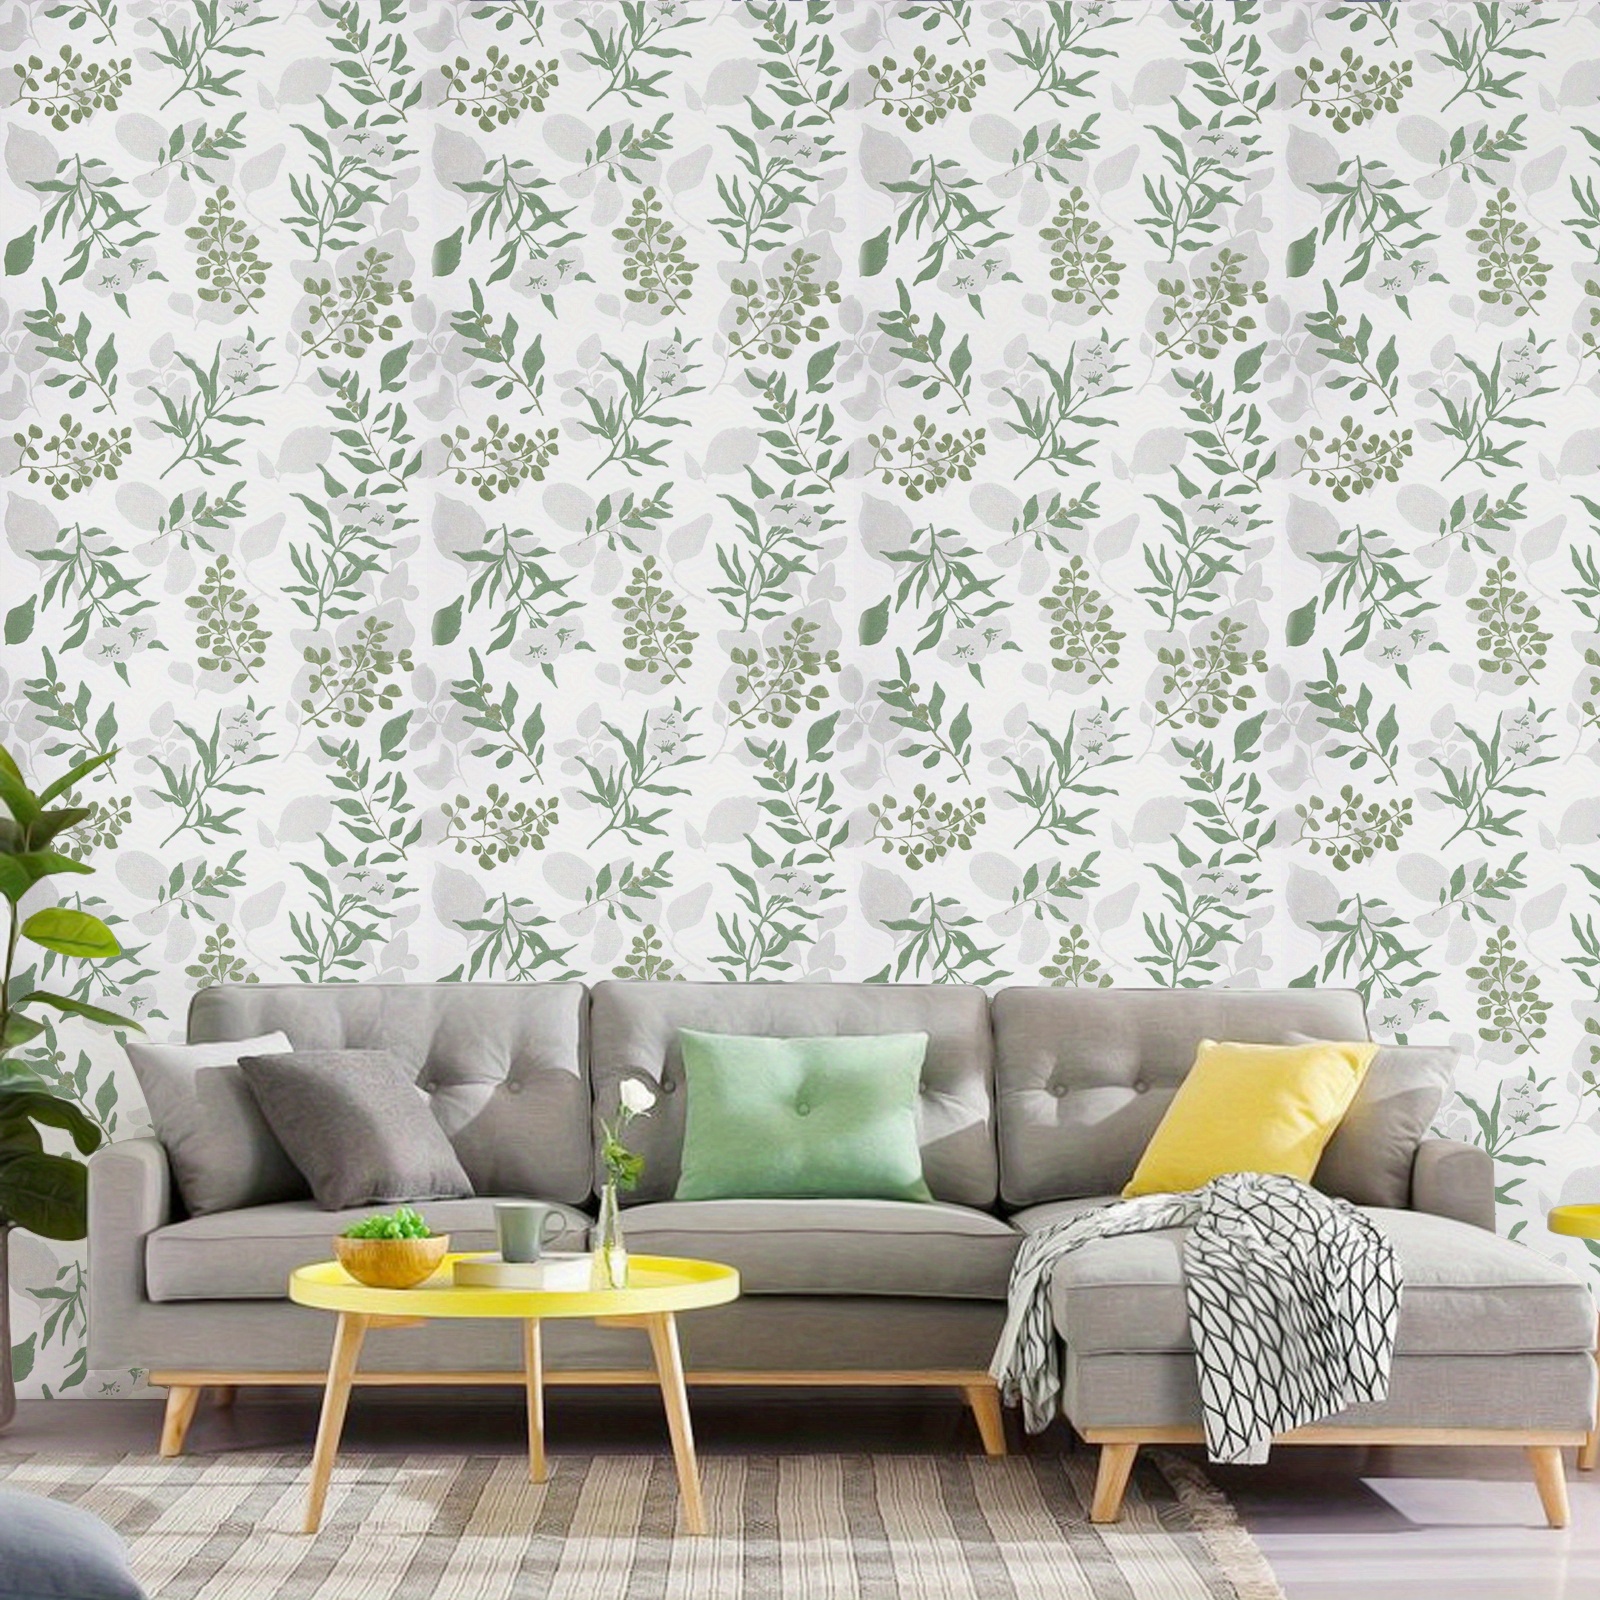 What is self adhesive removable wallpaper